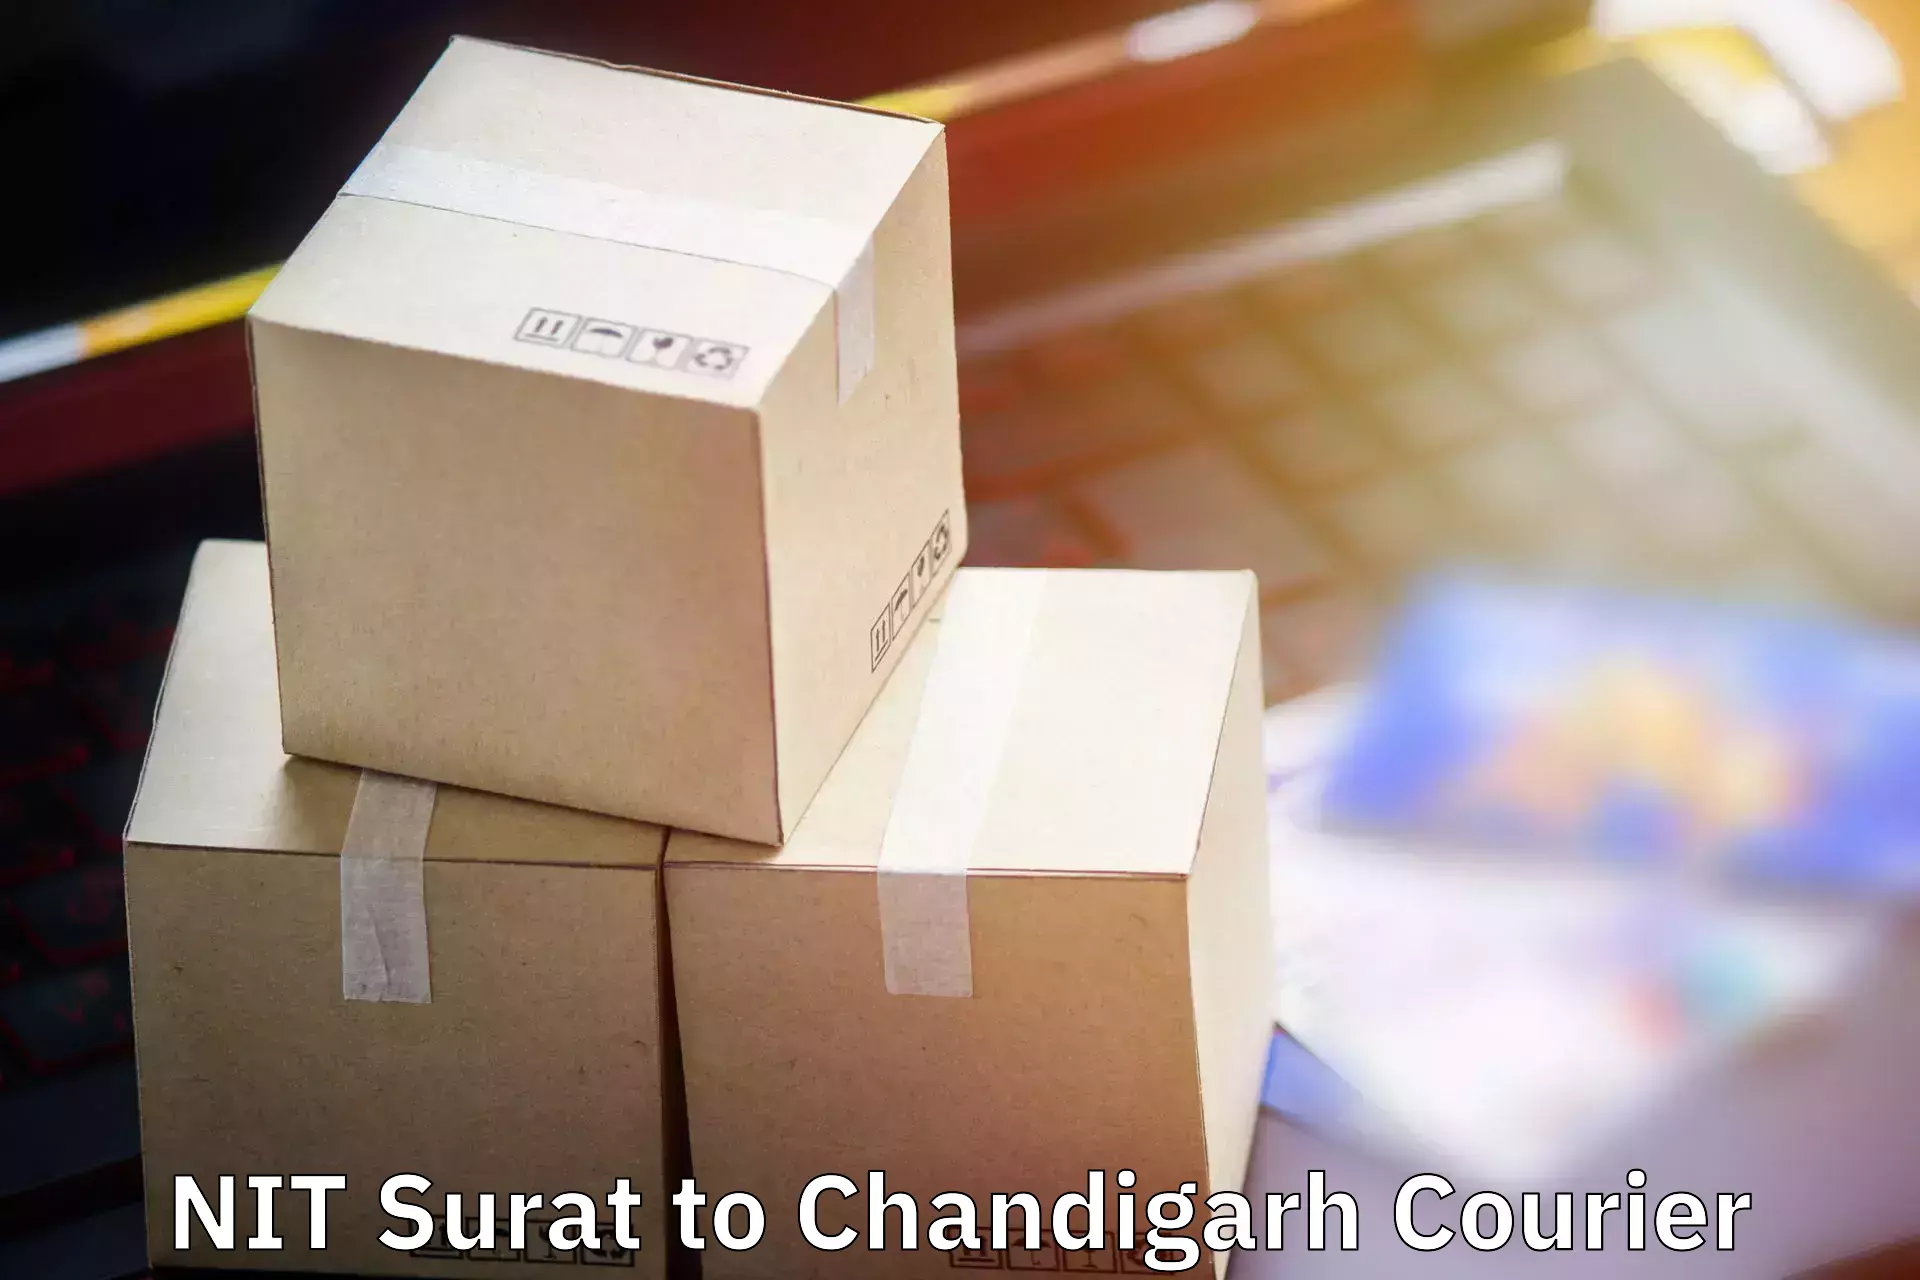 Luggage transport consultancy NIT Surat to Chandigarh